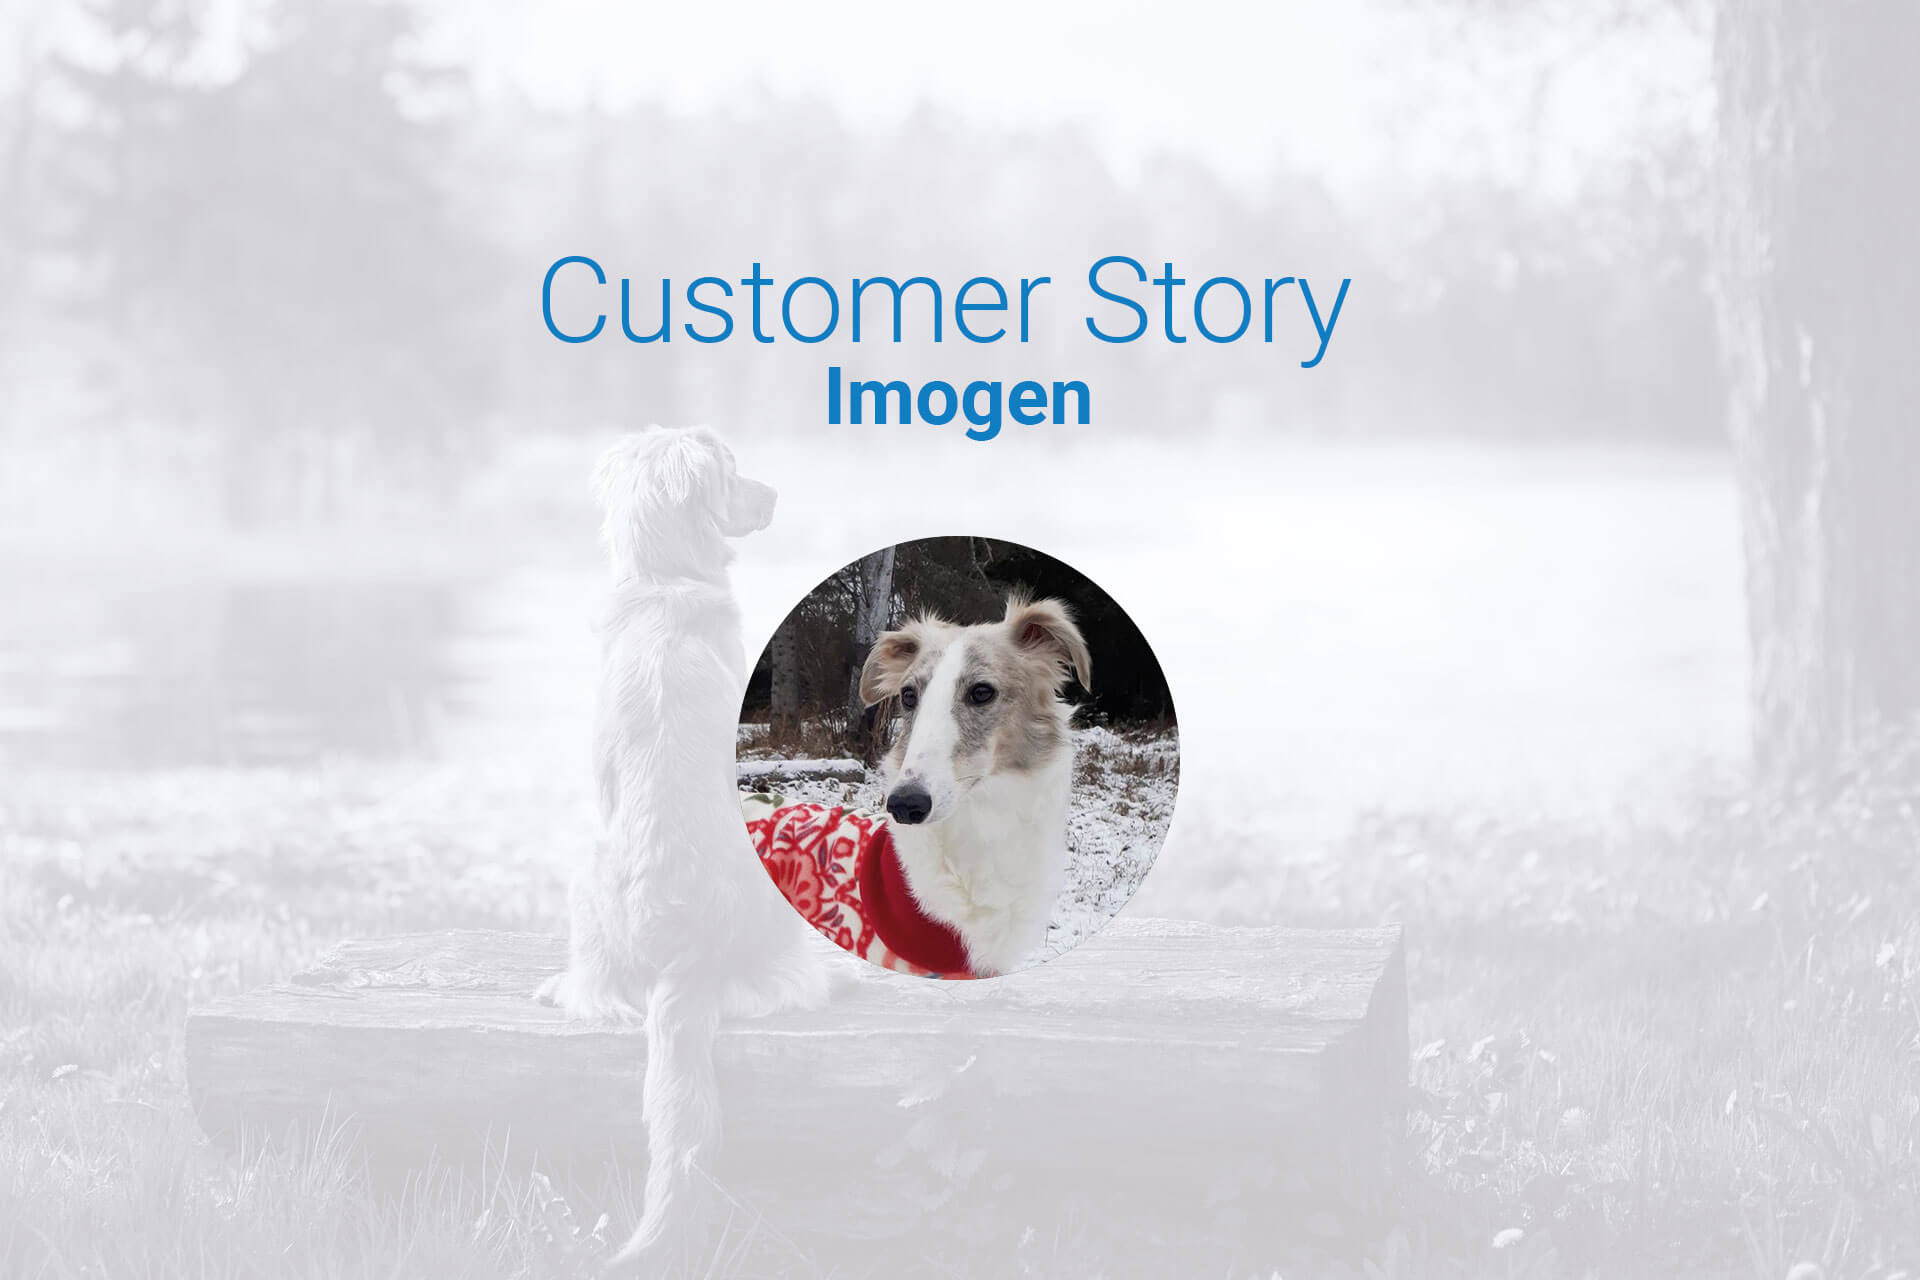 customer story header image for blog post about imogen, the dog who was saved from a frozen lake